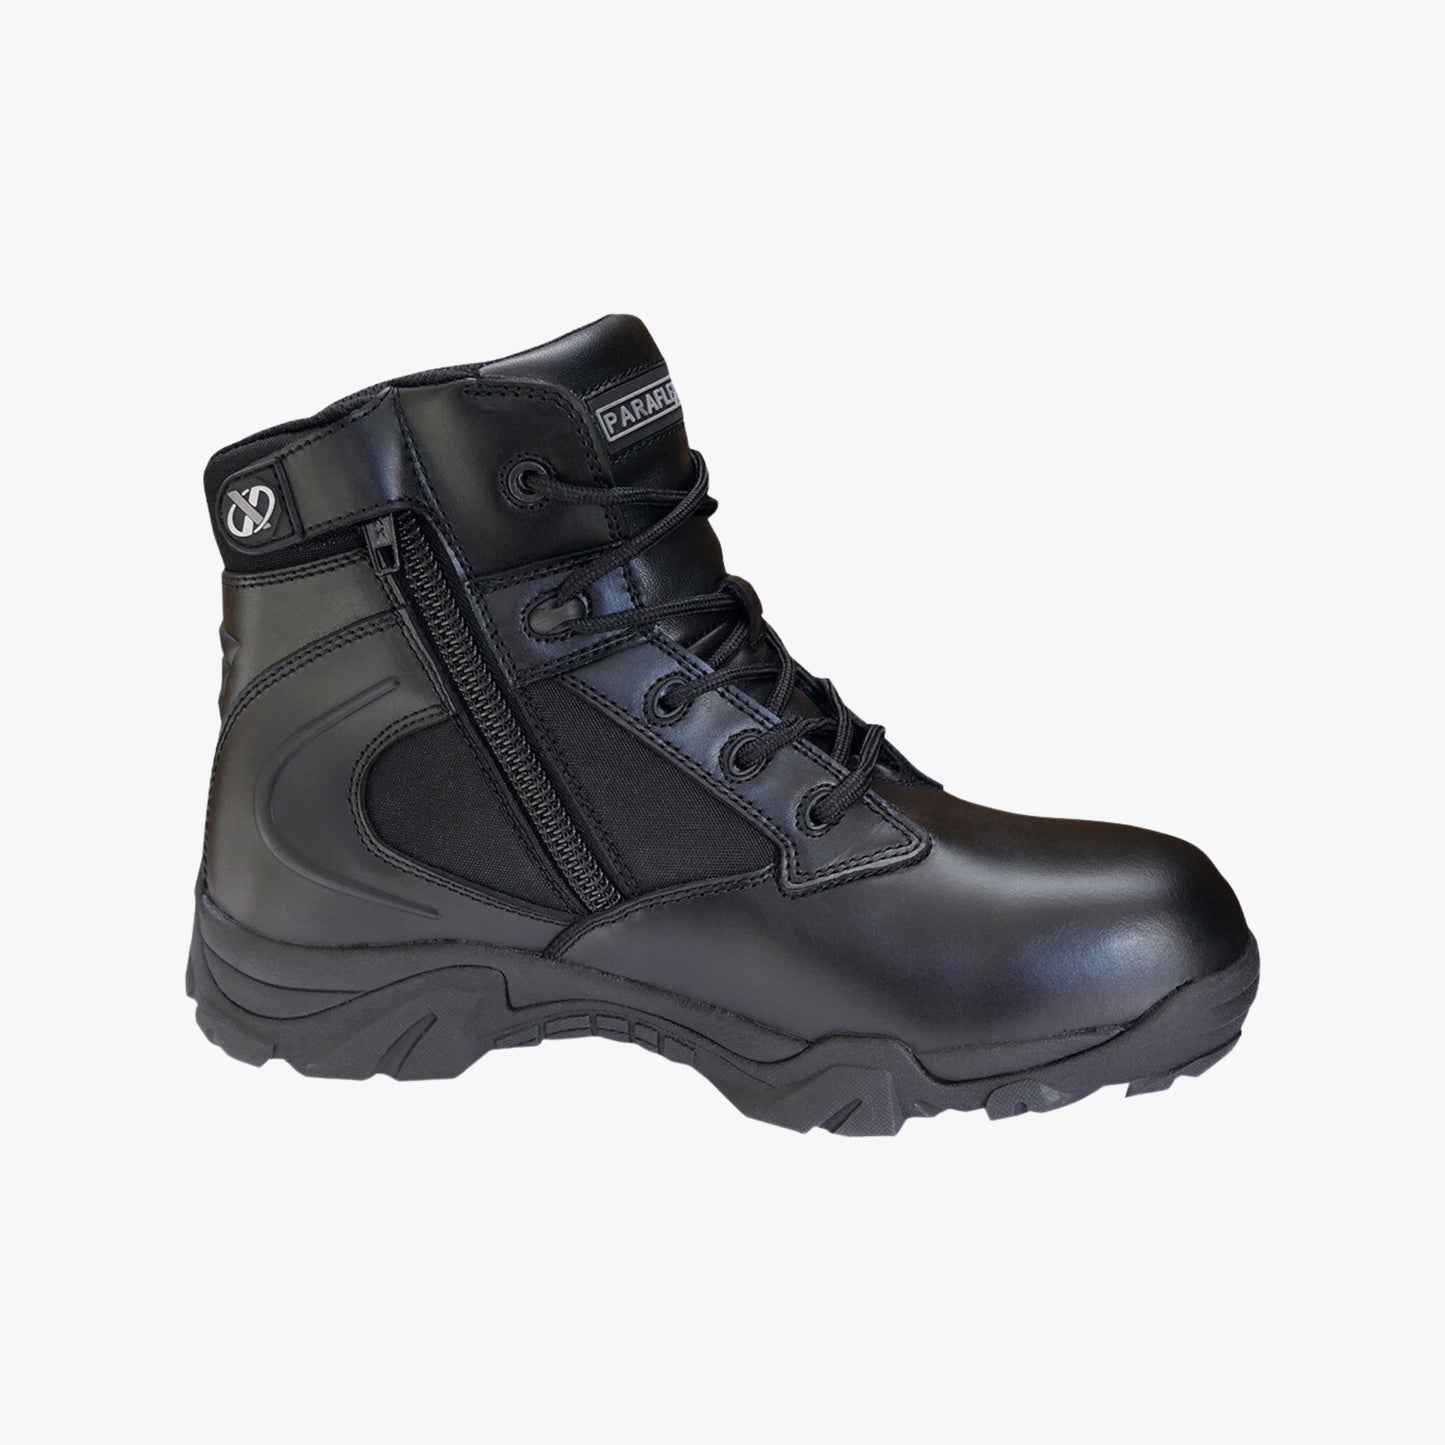 PARATAC 6 S 2021 - Side Zip Safety Boot